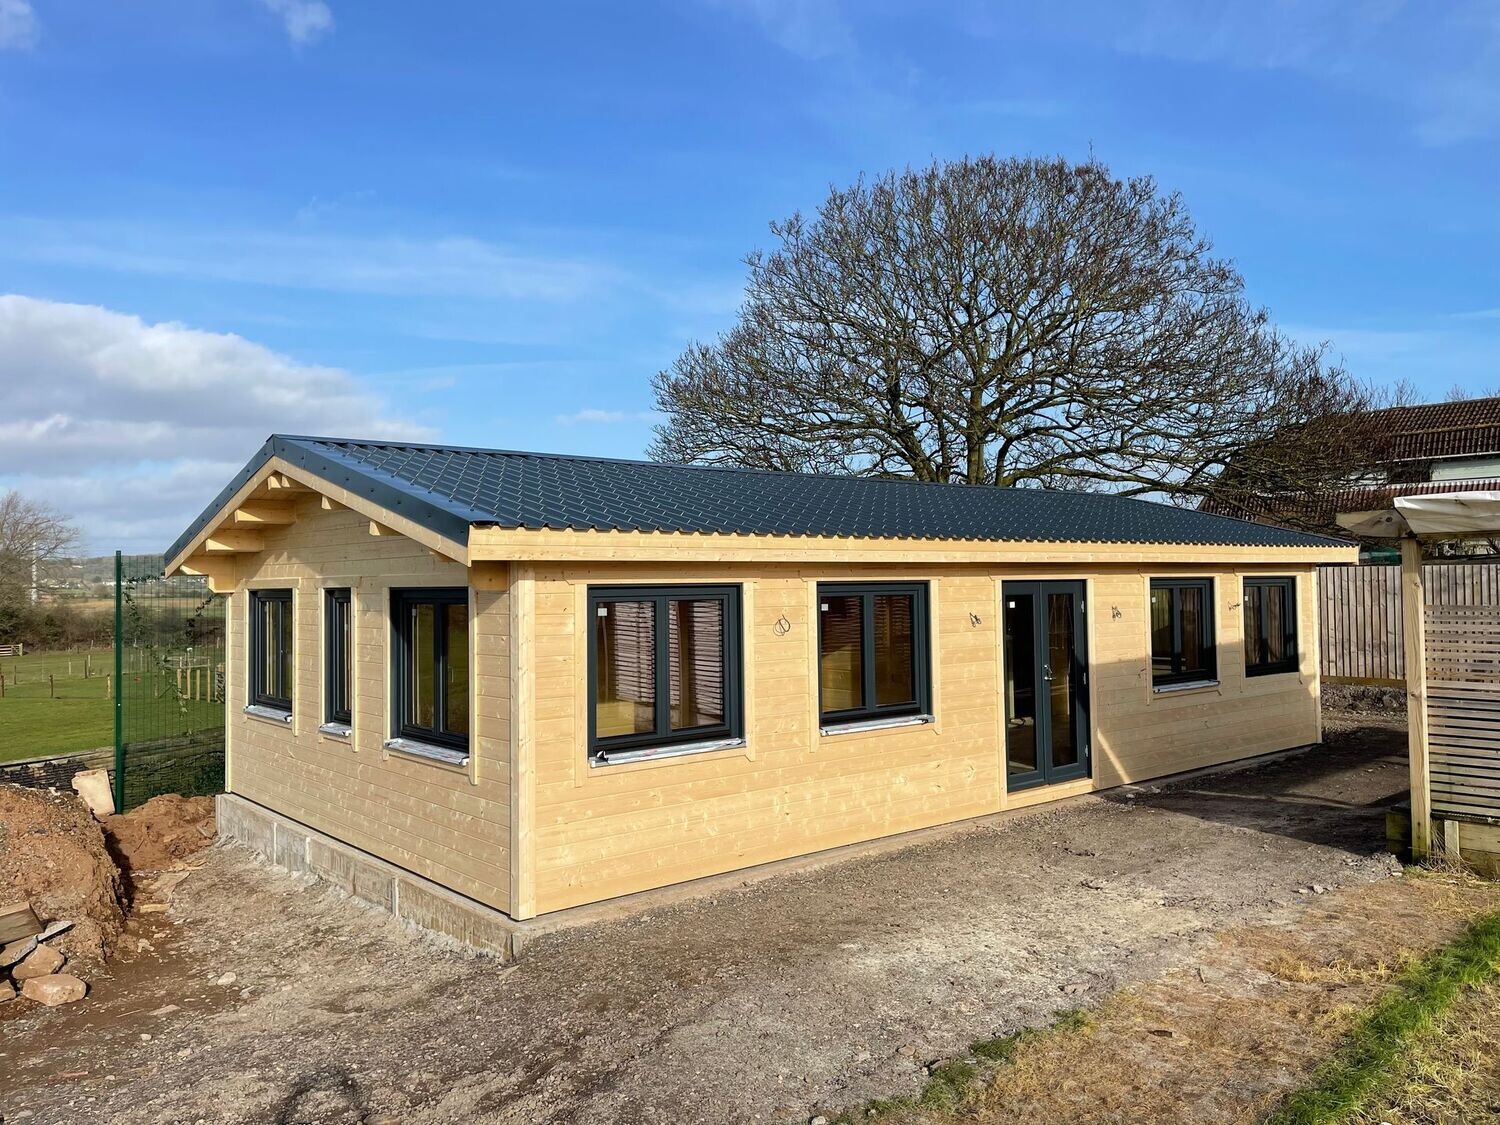 Canterbury 2 Bedroom Fully Insulated Log Cabin | 68mm Logs + 100mm Insulation + 28mm Cladding | 11.2 x 6.2m | Bespoke Range | Winter Pack Included